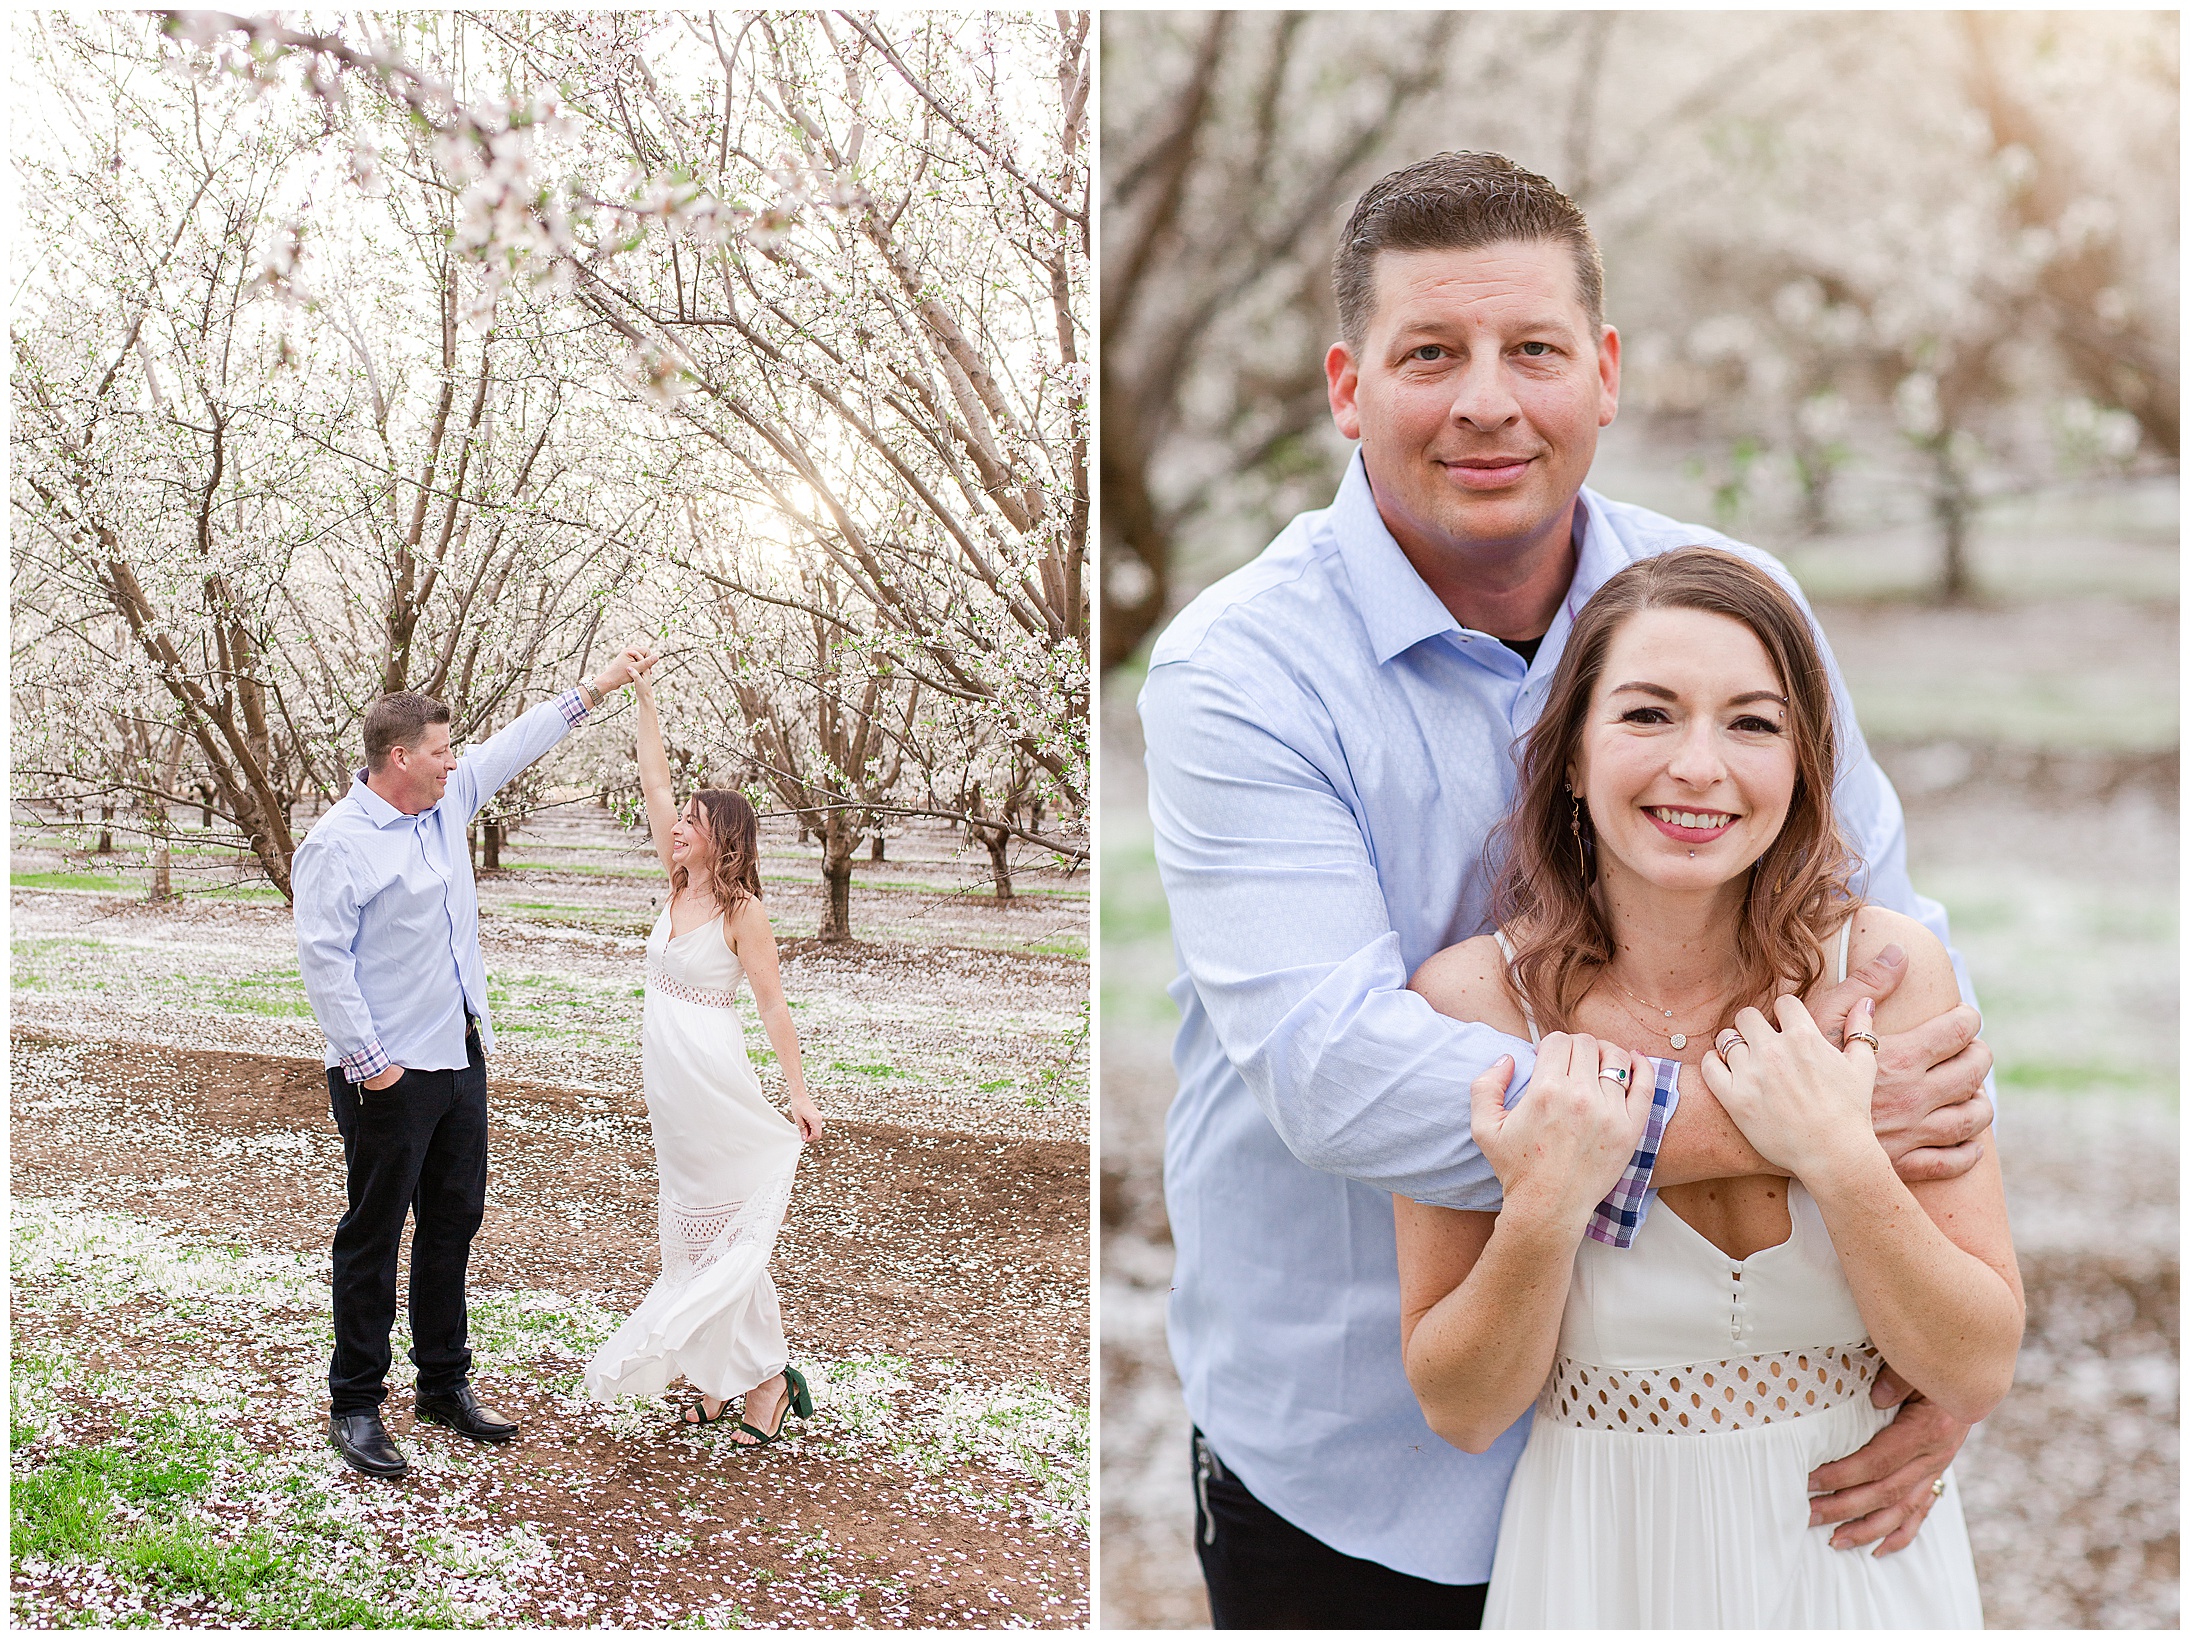 Spring Almond Blossom Couple Session Chico California Soft Pastels,